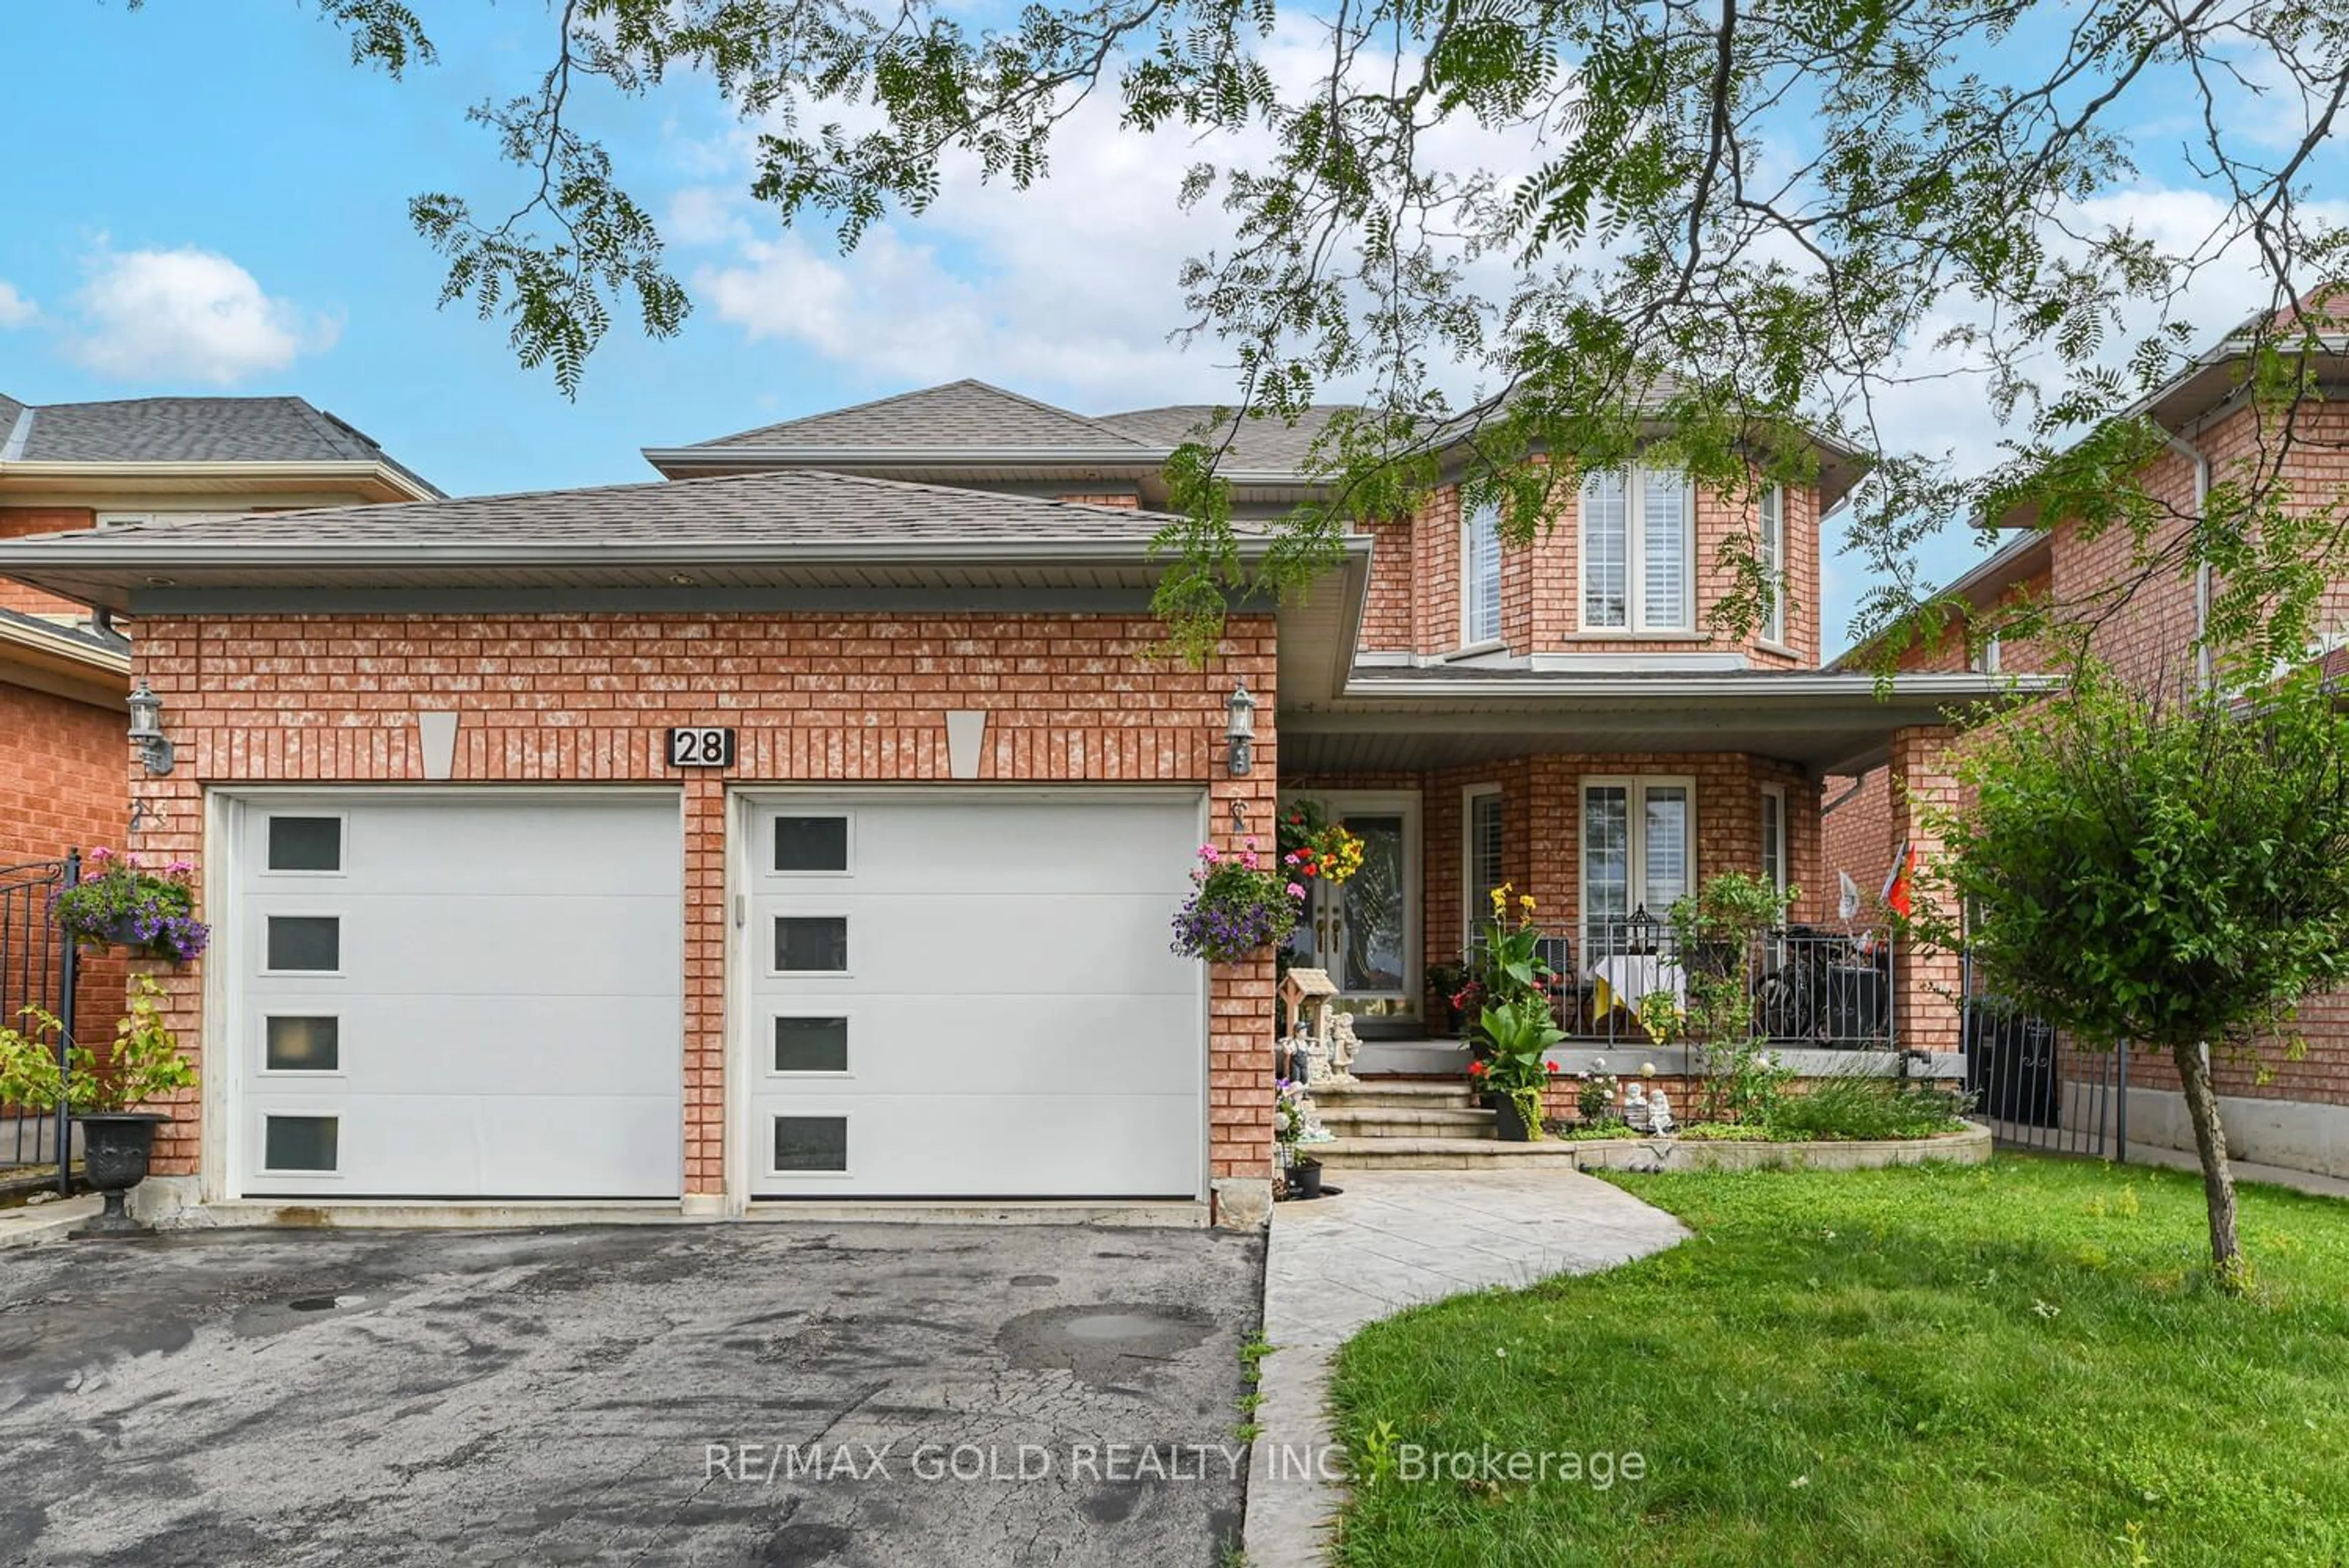 Home with brick exterior material for 28 Dragon Tree Cres, Brampton Ontario L6R 2P6